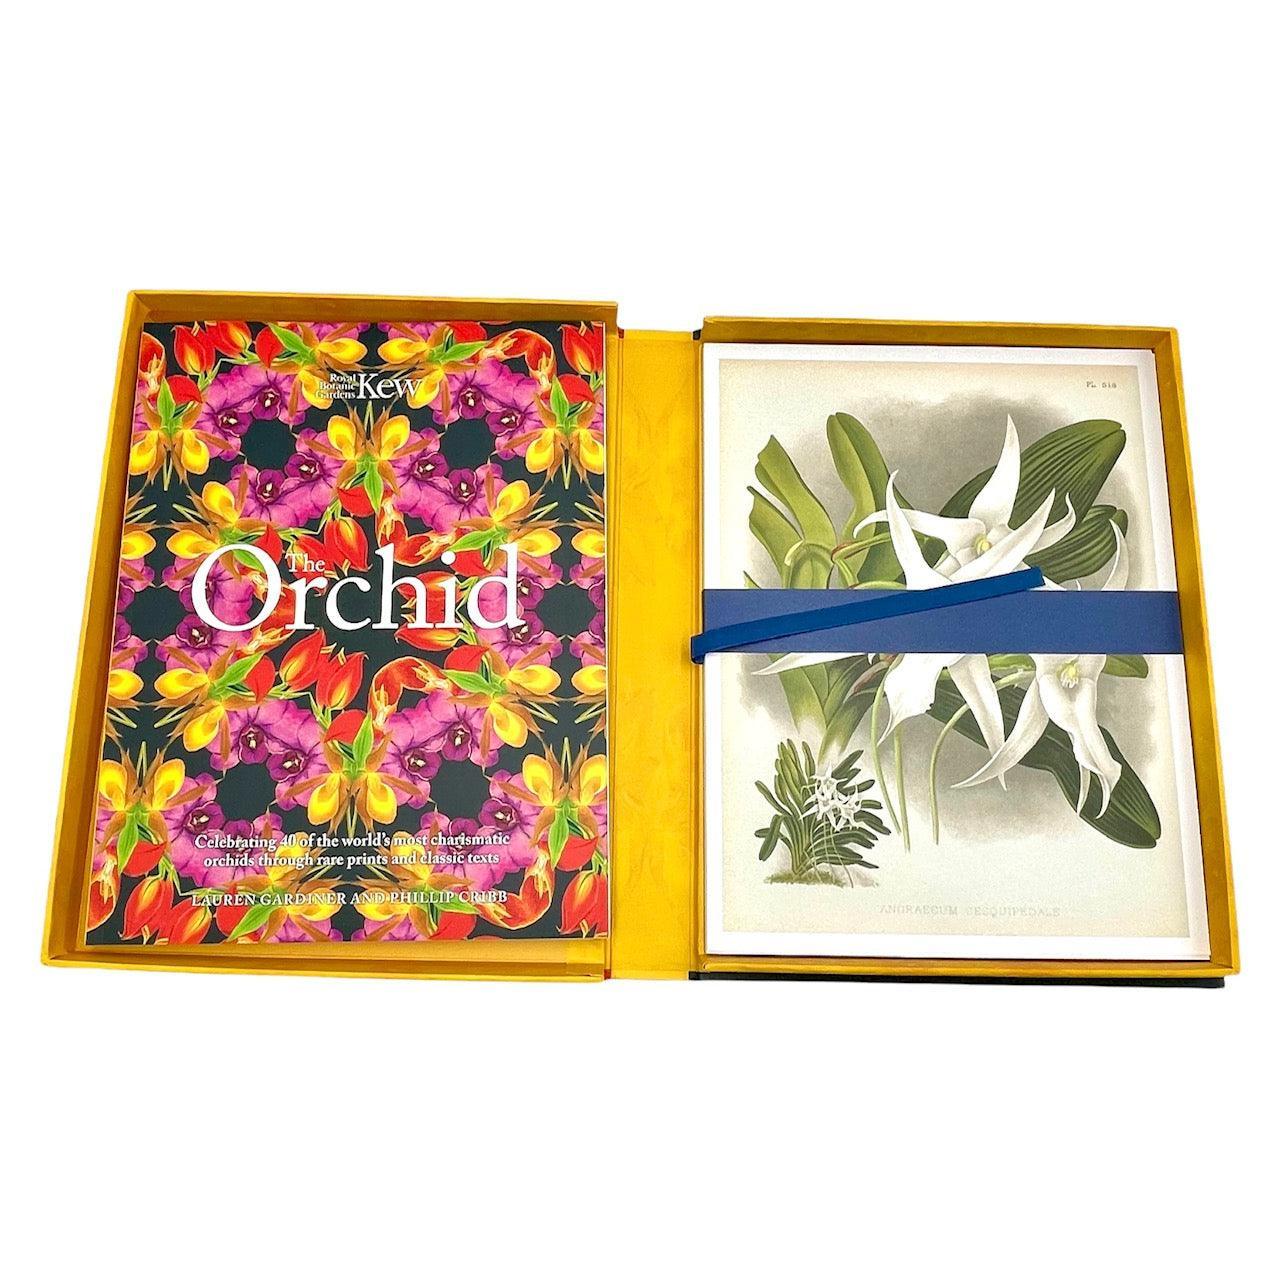 The Orchid (Royal Kew Botanical Gardens): Deluxe Boxed Edition, With 40 Frameable Prints - Grinning Cat Books - Books - BOTANY, GARDENING, NATURAL HISTORY, SCIENCE